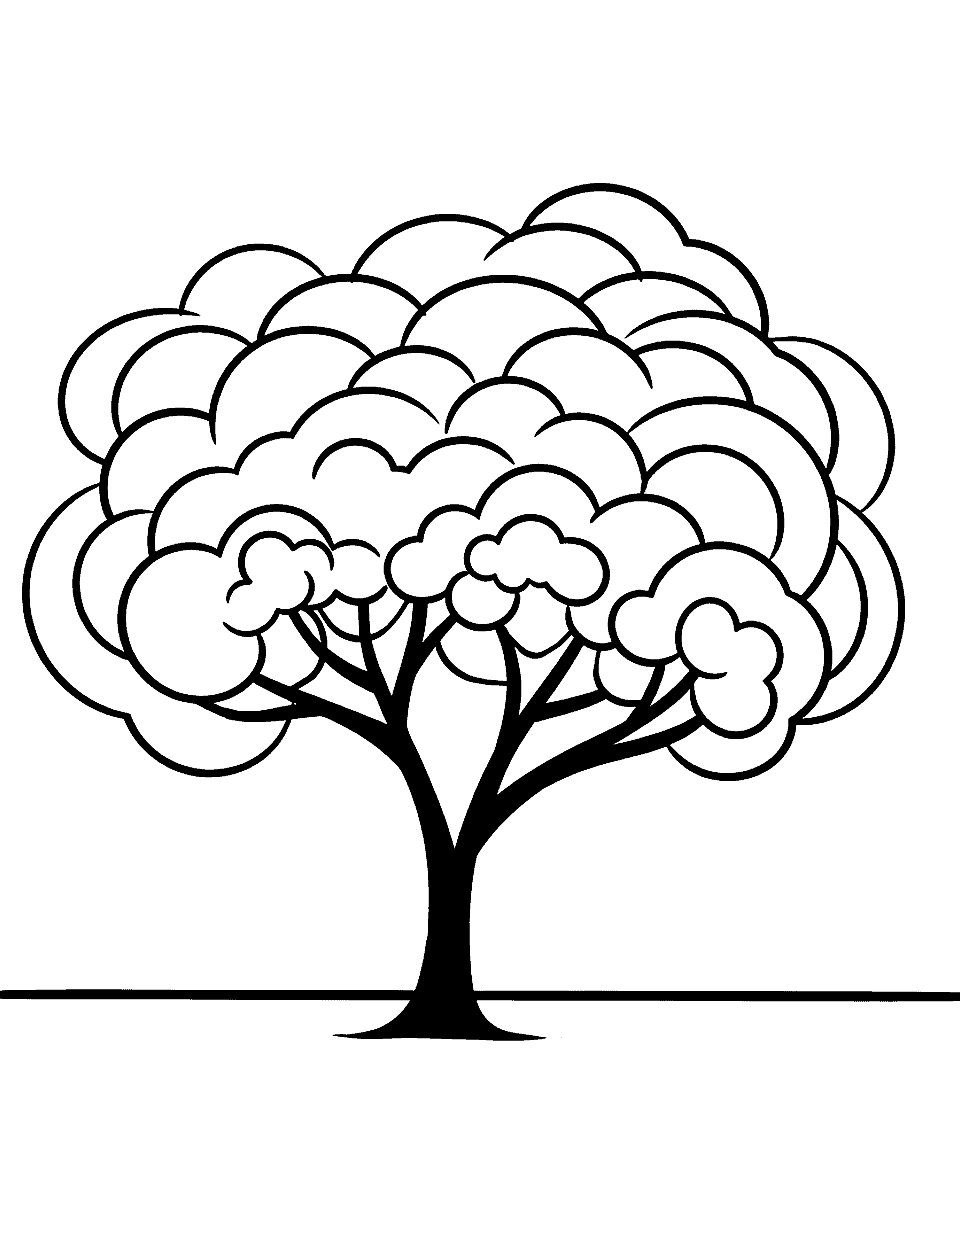 Simple Nature Drawing Coloring Page - A minimalist drawing of a tree against a clear sky.